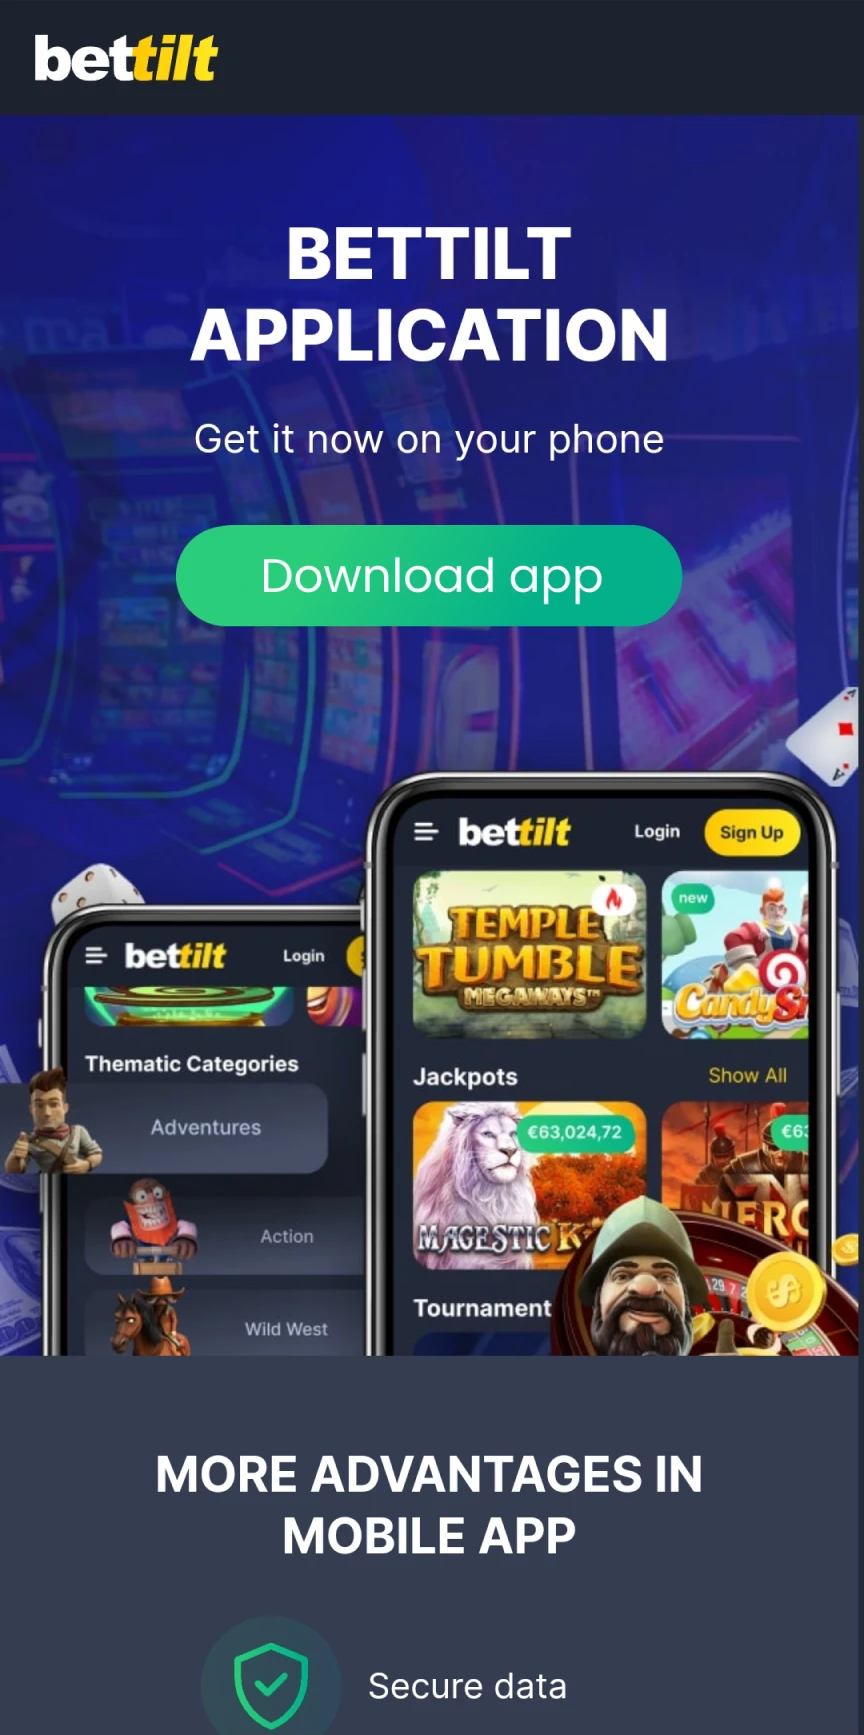 You need to start downloading the Bettilt app for iOS.